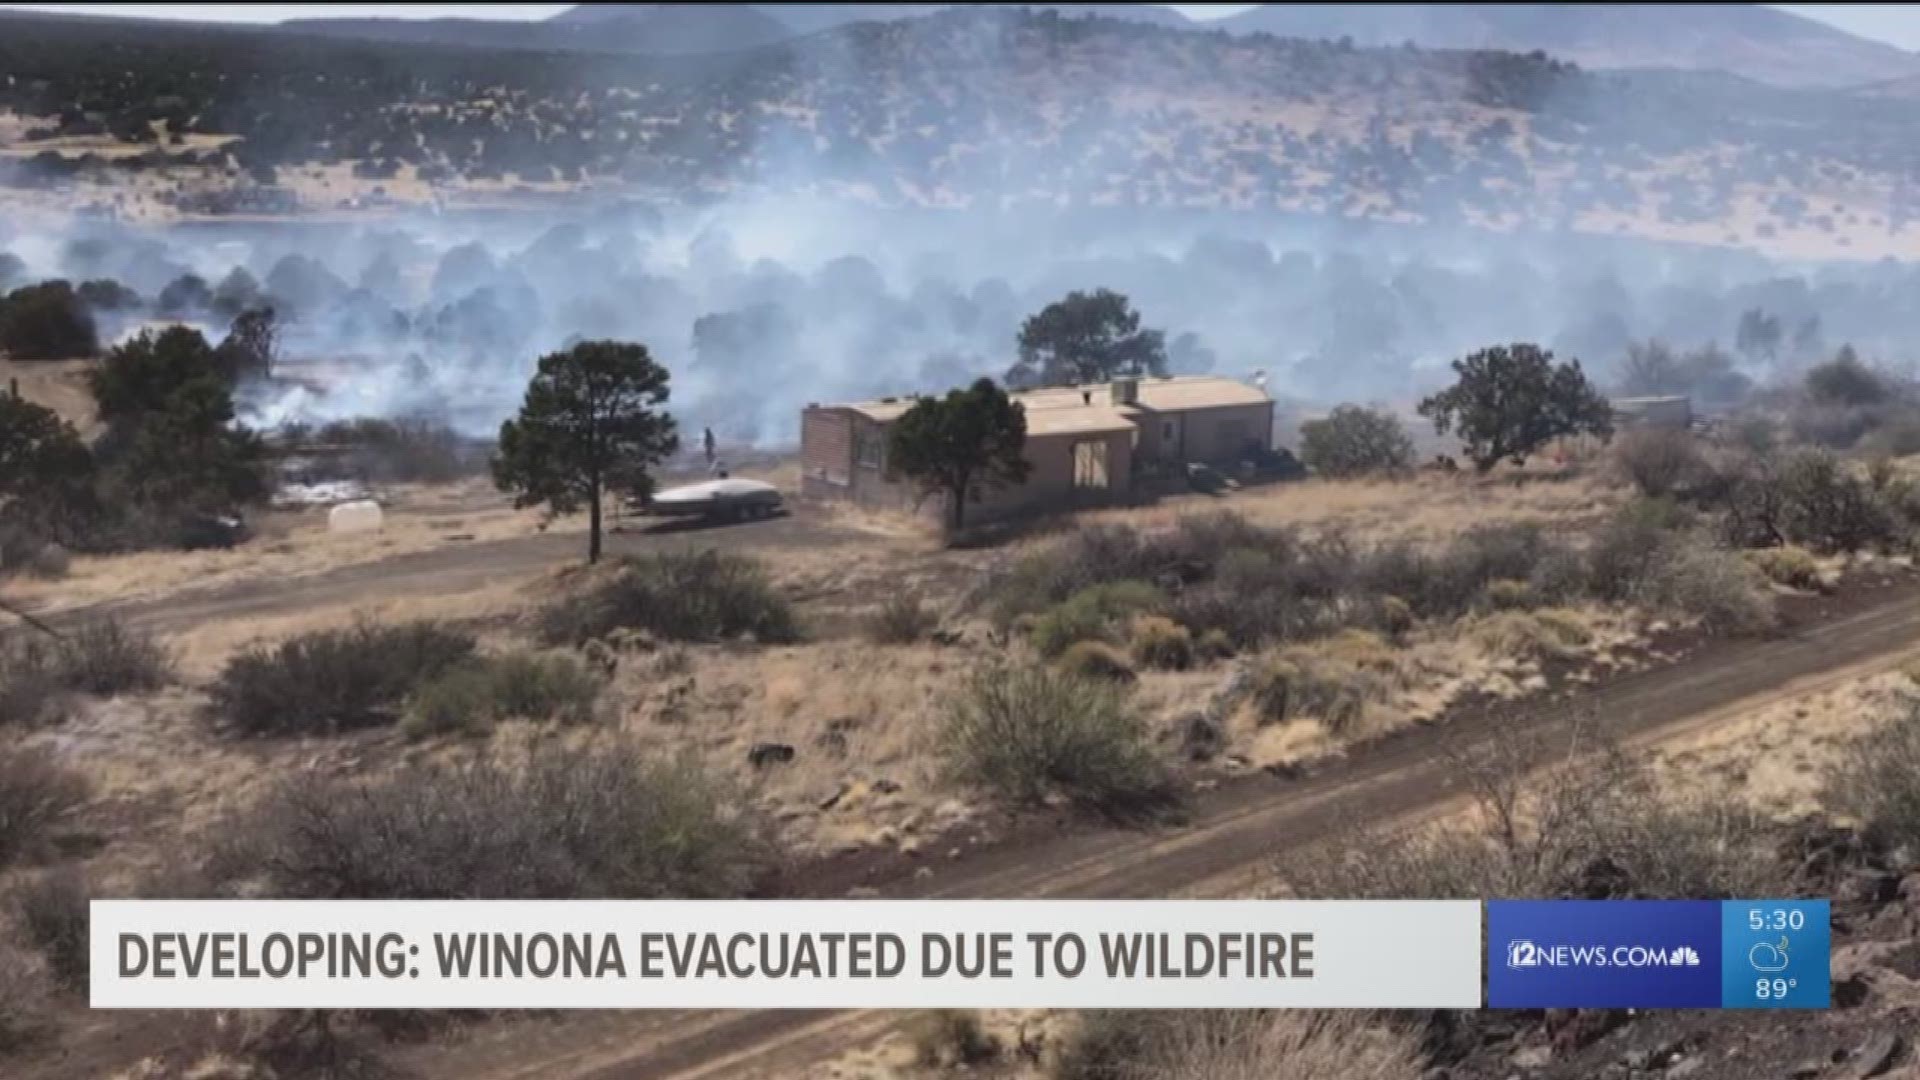 Coconino County officials say crews had pushed the growing blaze back against the cinder hills in the area by 2:30 p.m. Sunday. The Arizona State Forestry Department says the fire has grown over 50 acres.